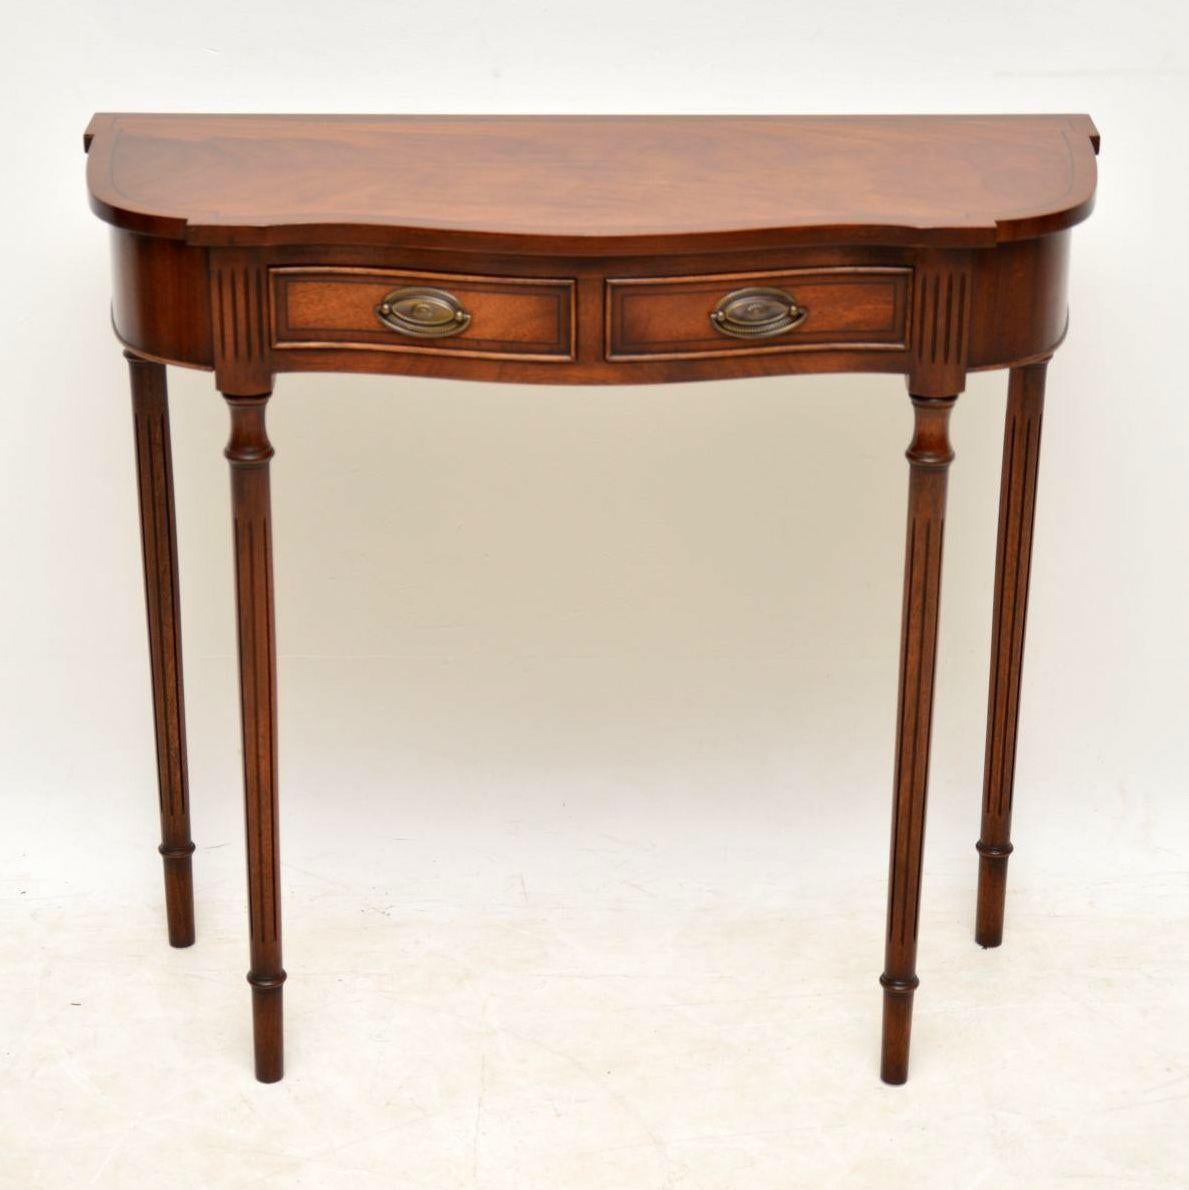 This antique style mahogany console side table is really slim from back to front & quite small in proportions. This table has a serpentine shaped front. The flame mahogany top is cross banded with fine ebony inlay in-between & the drawers are the